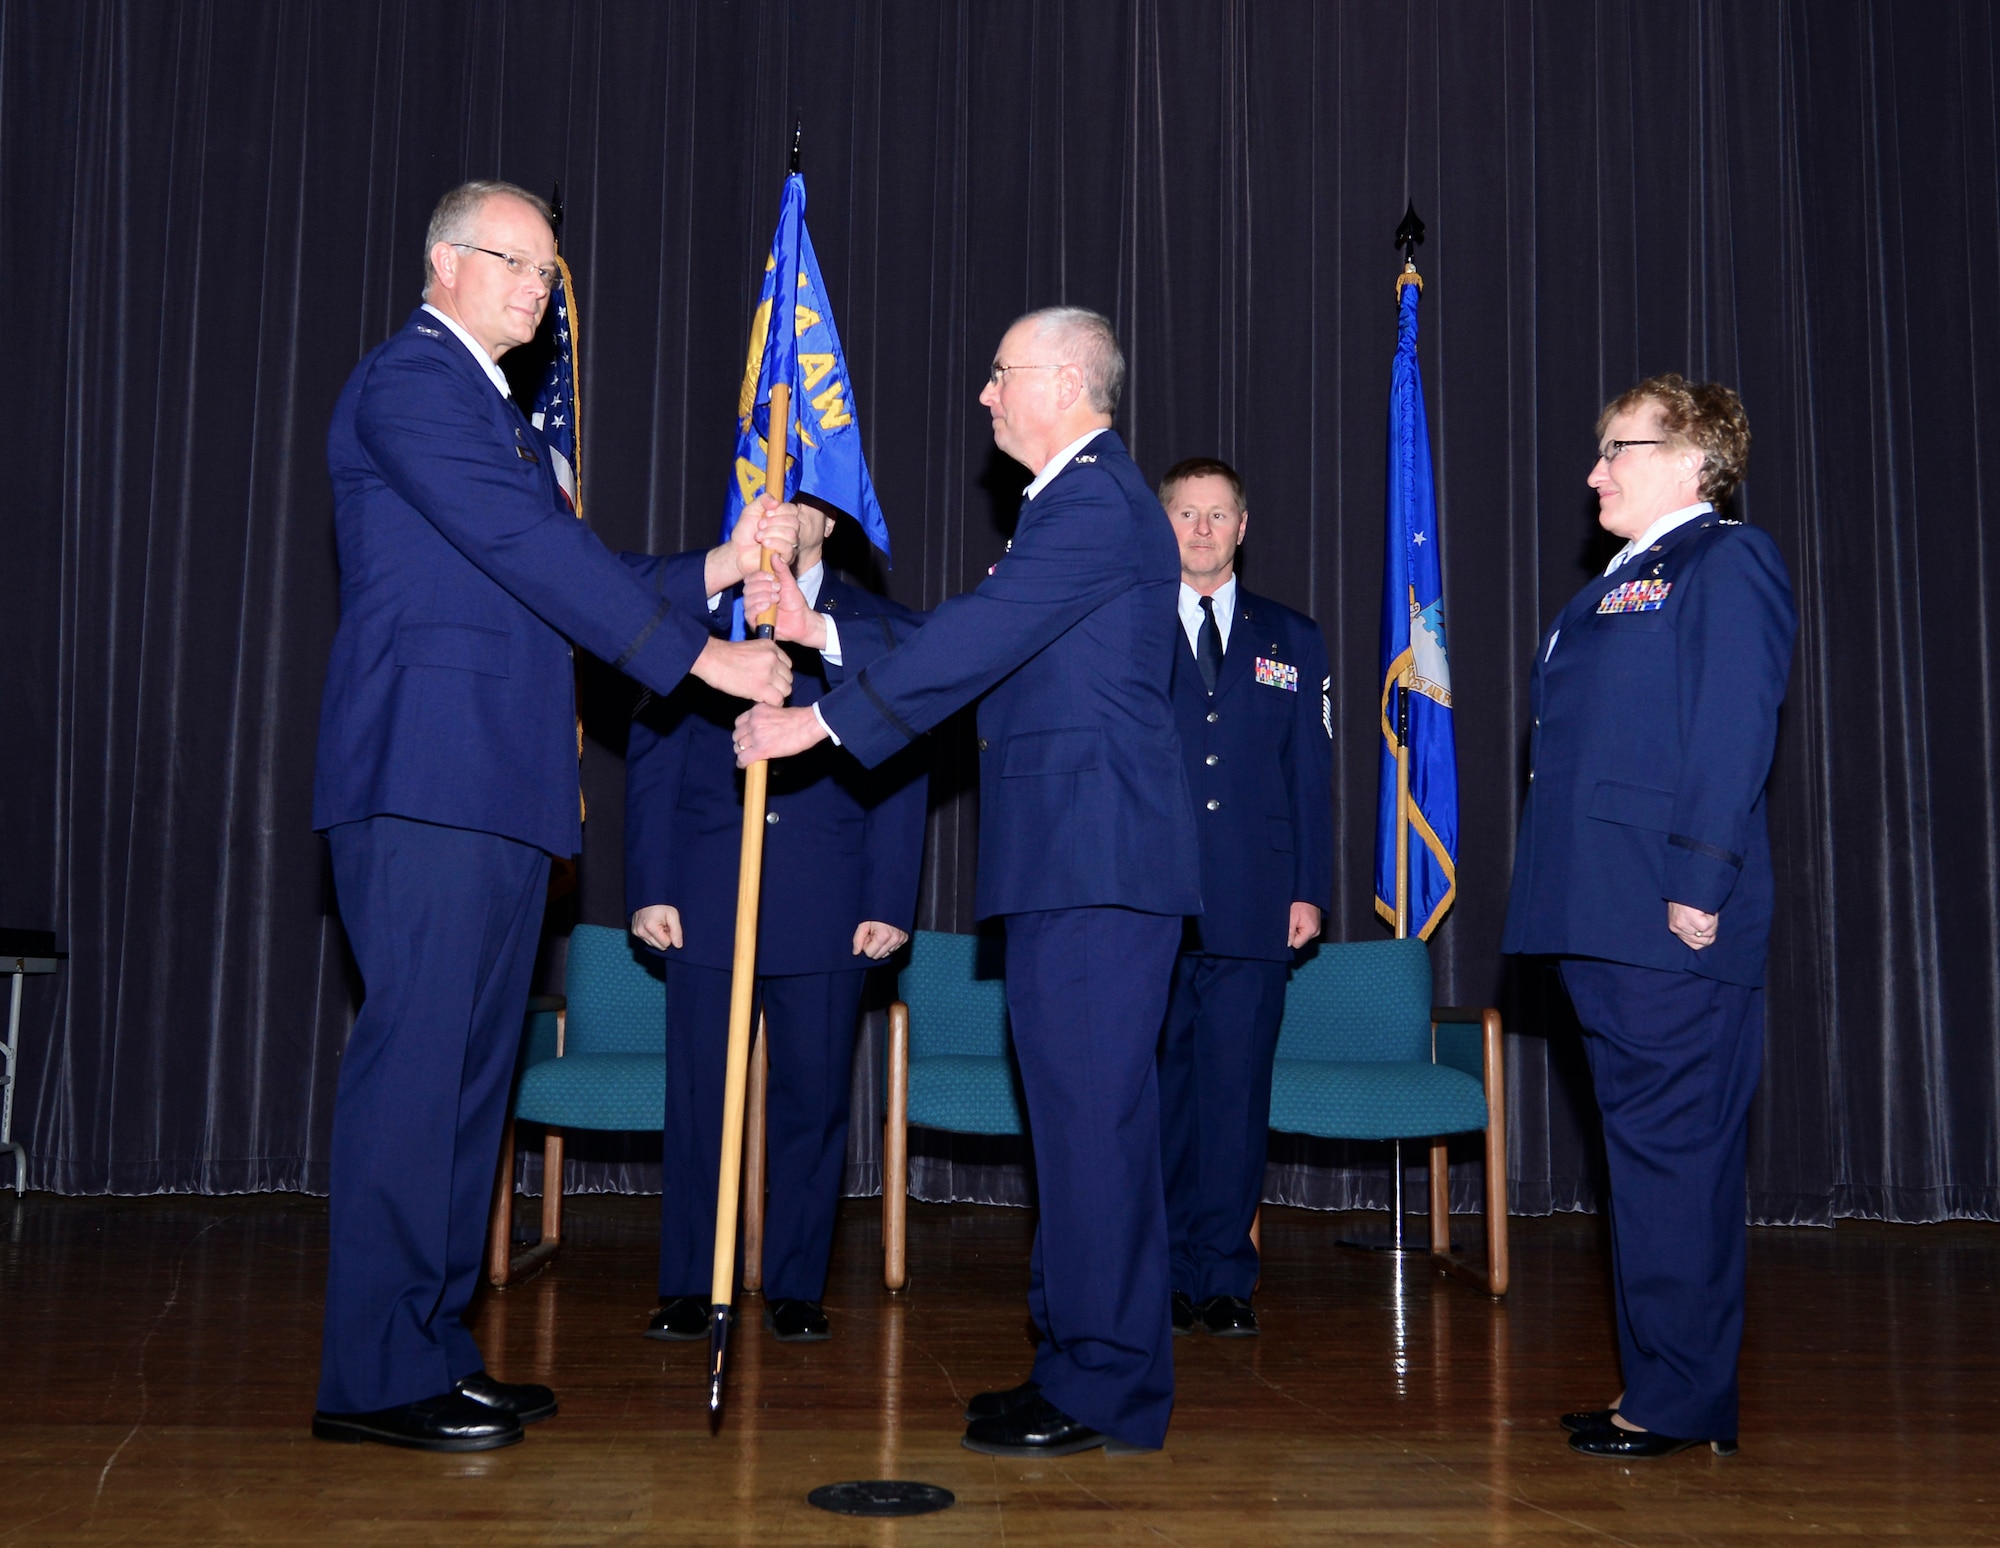 Col. Victor D. Brown (right) assumes command of the 914th Aeromedical Staging Squadron from Col. Steven Parker at Niagara Falls Air Reserve Station, Oct. 4, 2014. Prior to commanding the 914th Aeromedical Staging Squadron, Brown served the 914th Airlift Wing as Chief of Dental Services, and replaces Col. Catherine Hallett (far right). (U.S. Air Force photo by Staff Sgt. Stephanie Sawyer)